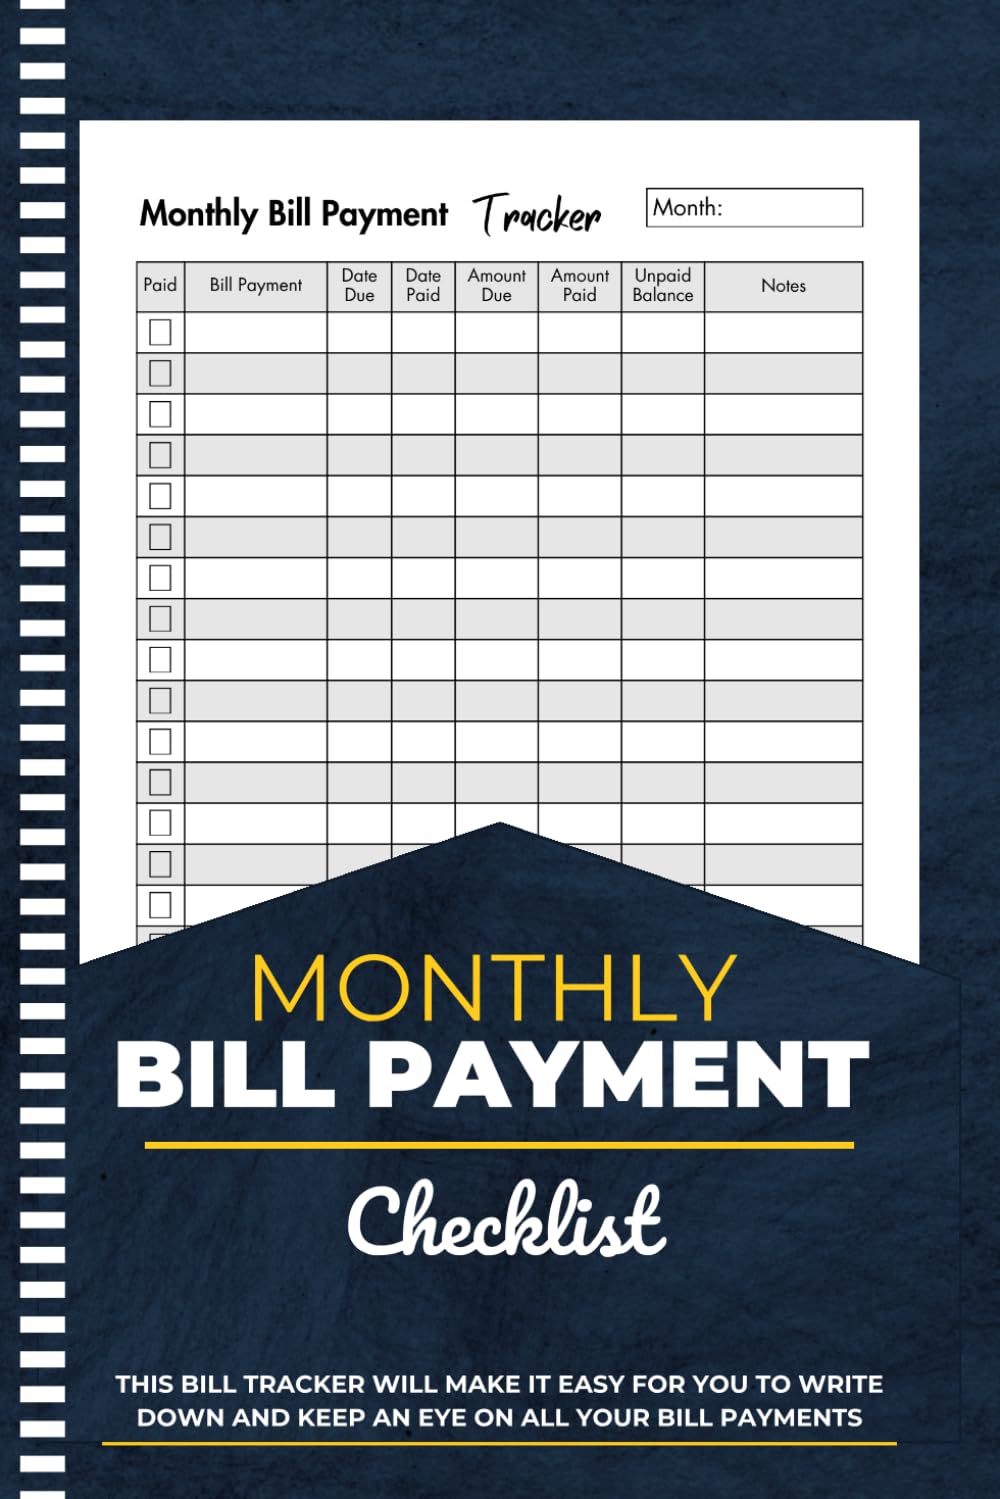 Bill Tracker Notebook: Monthly Bill Planner& Organizer for Financial Budgeting, Finance & Payments Checklist Organizer - 108 Pages